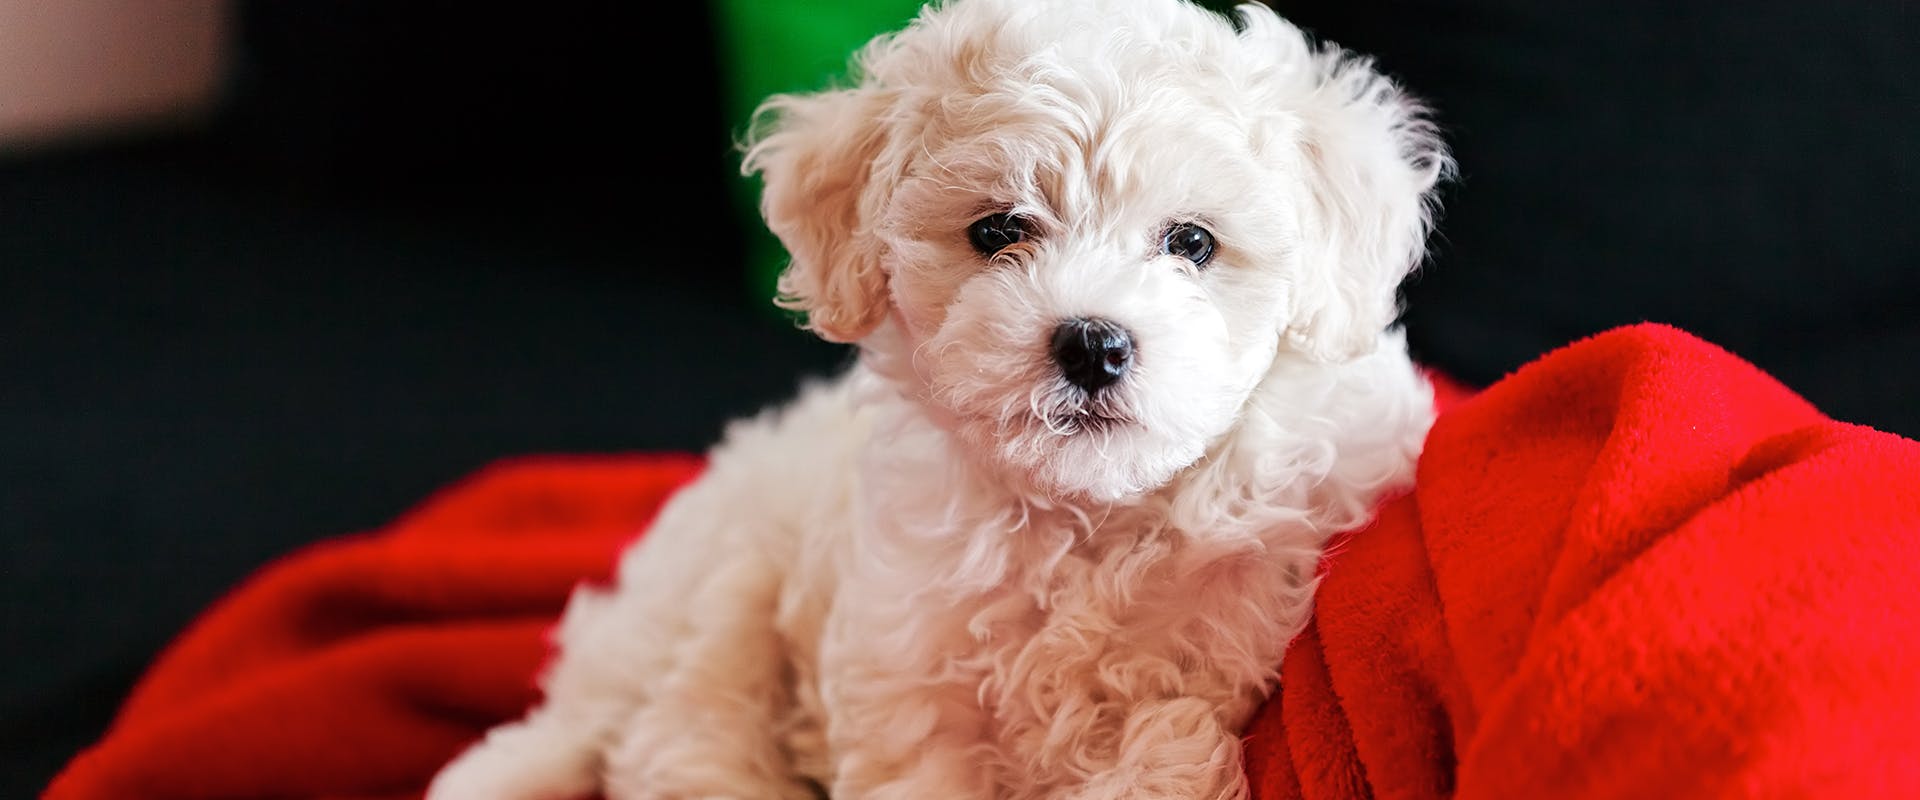 A cute Poochon puppy sitting on a bright red blanket